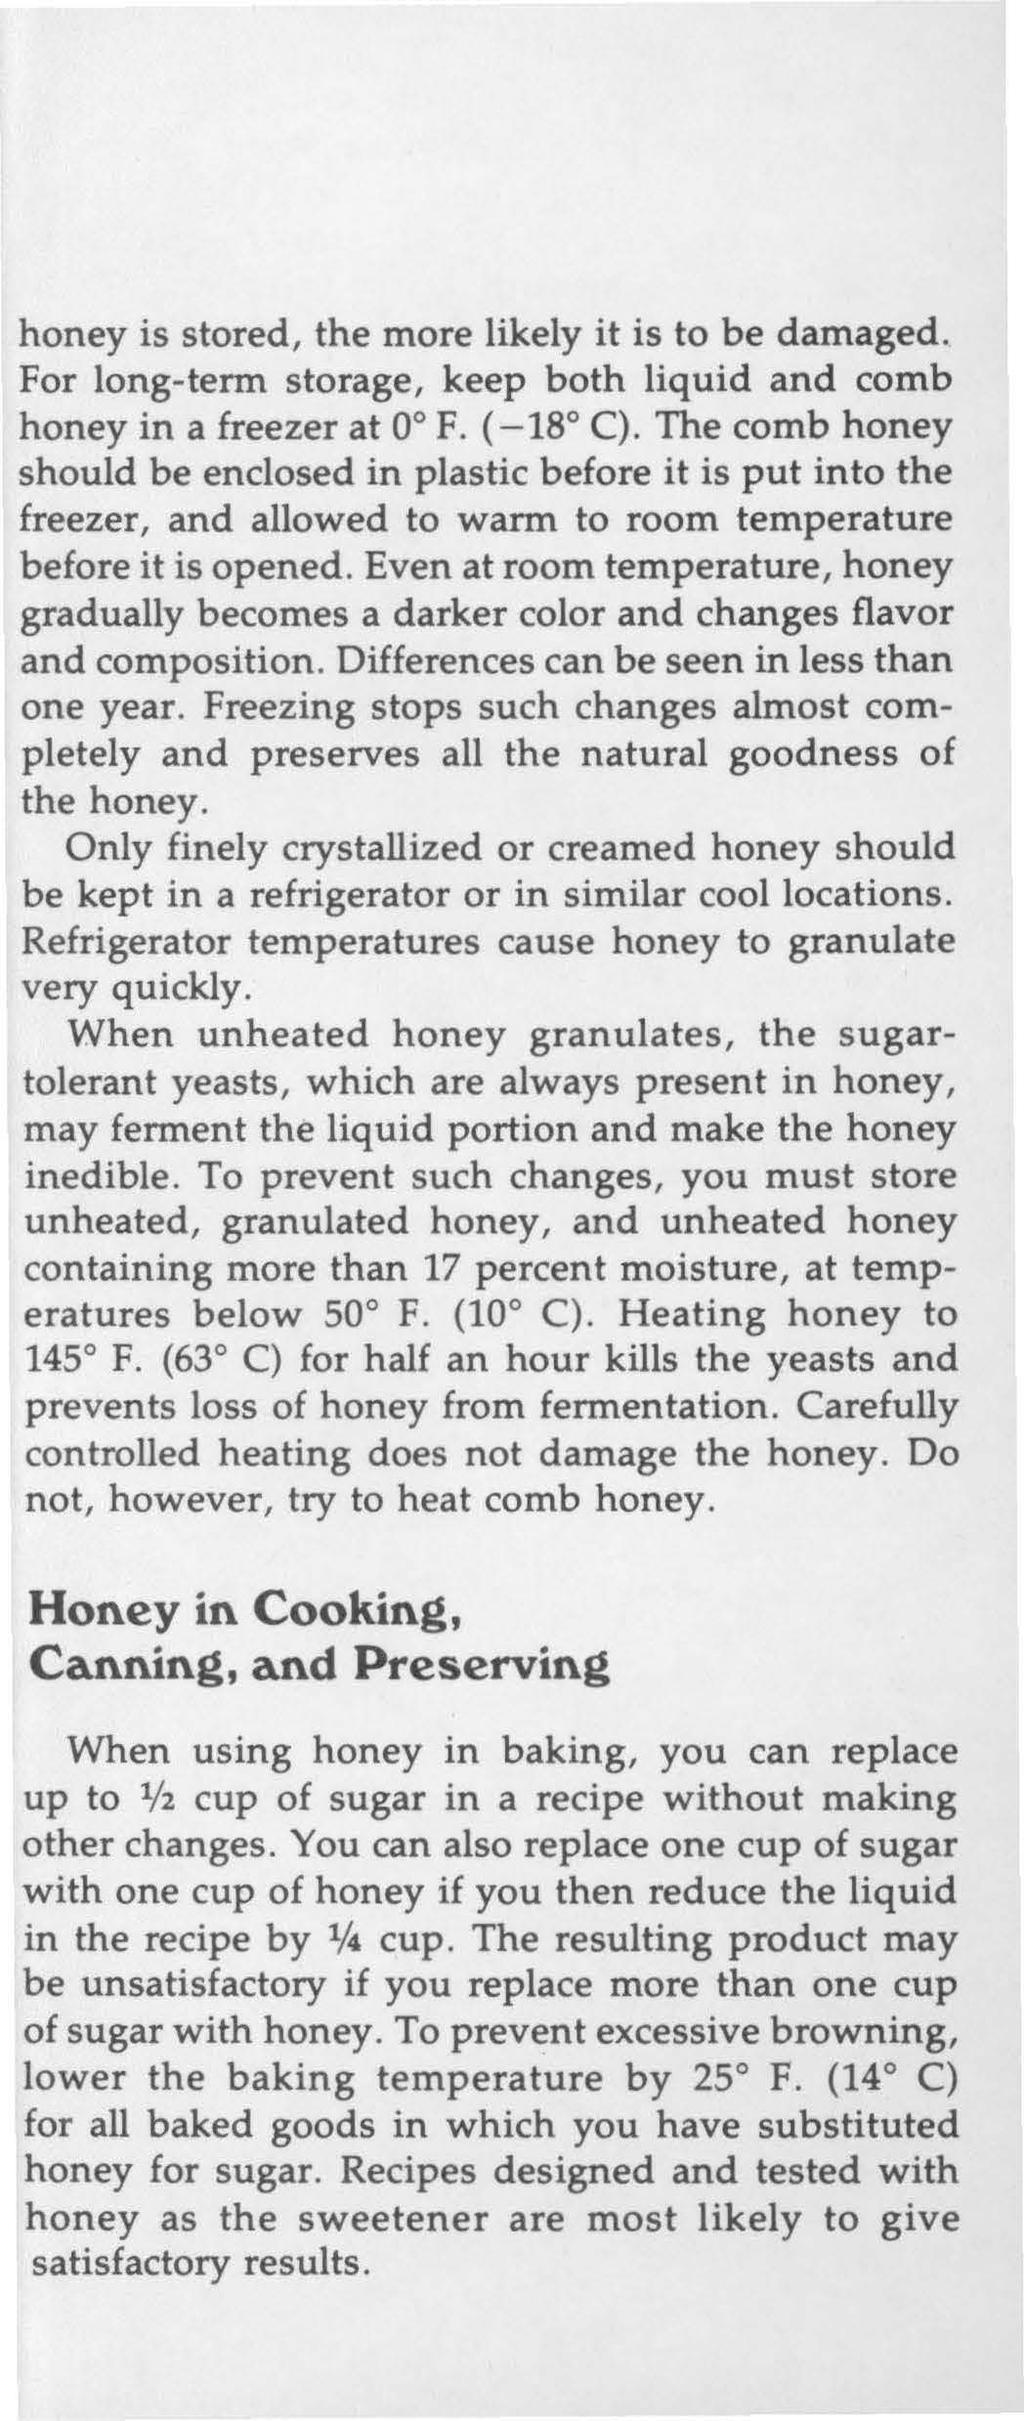 honey is stored, the more likely it is to be damaged. For long-term storage, keep both liquid and comb honey in a freezer at oo F. ( -18 C).